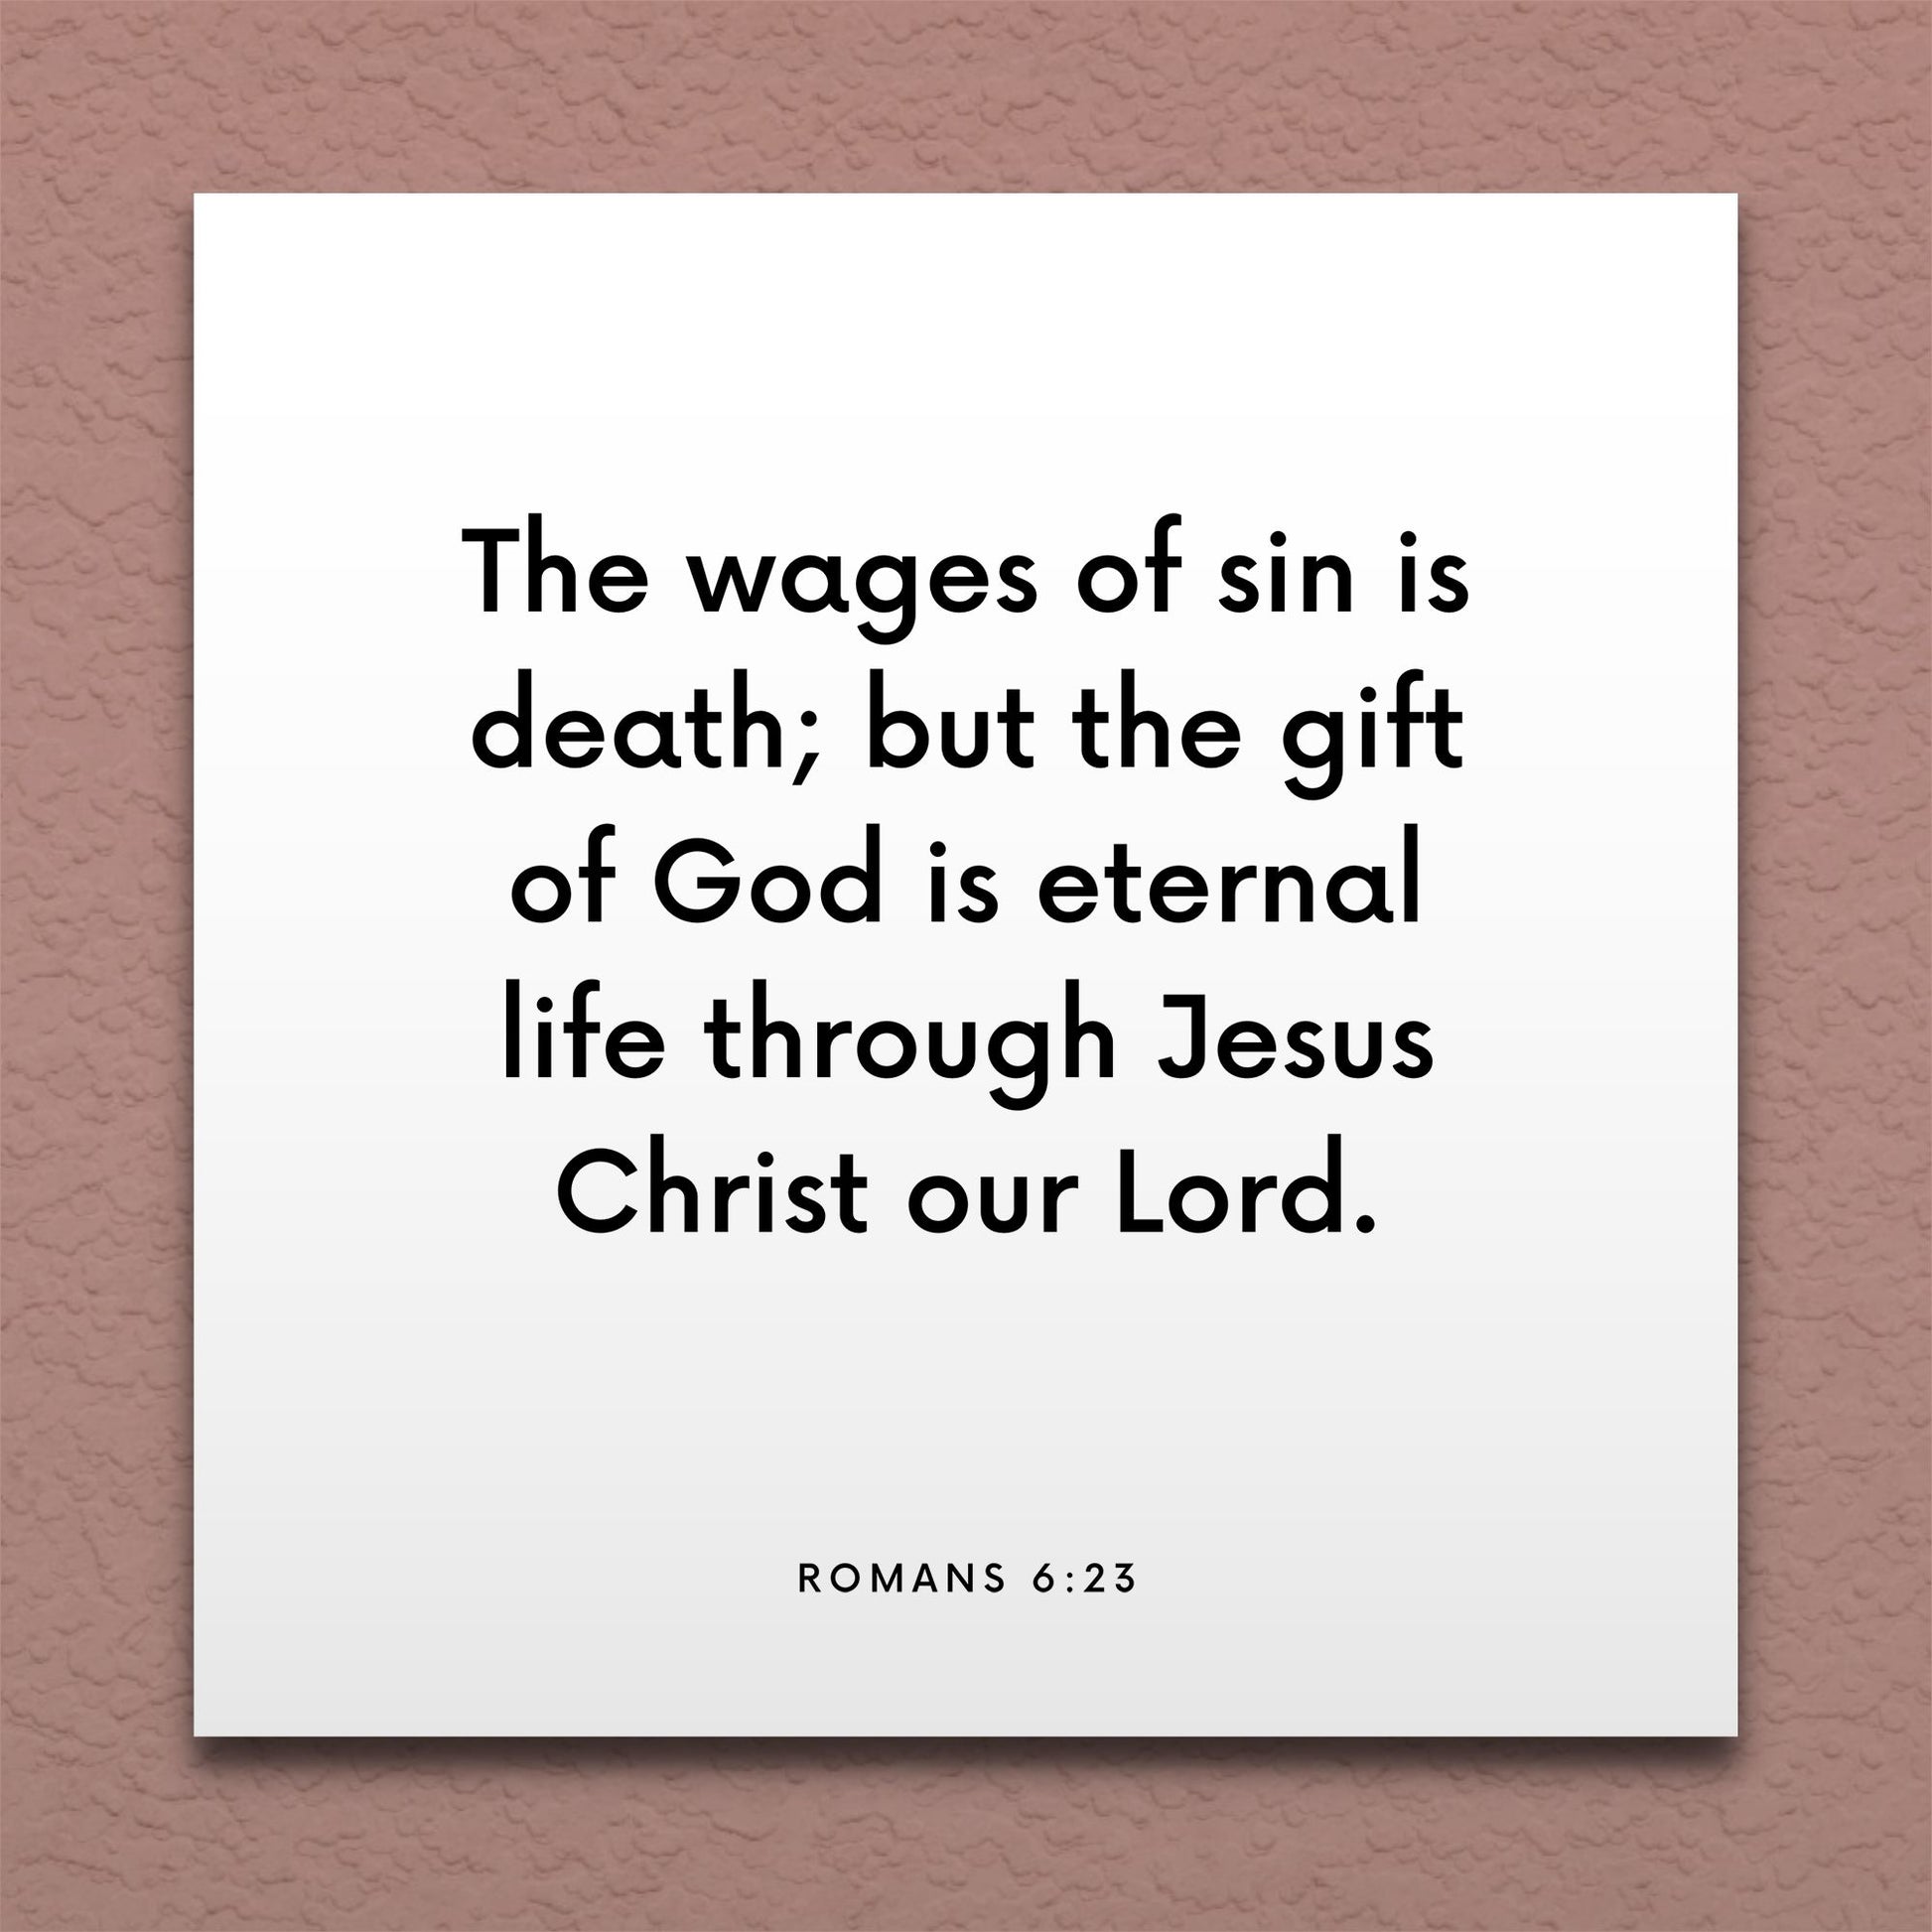 Wall-mounted scripture tile for Romans 6:23 - "The wages of sin is death but the gift of God is eternal life"